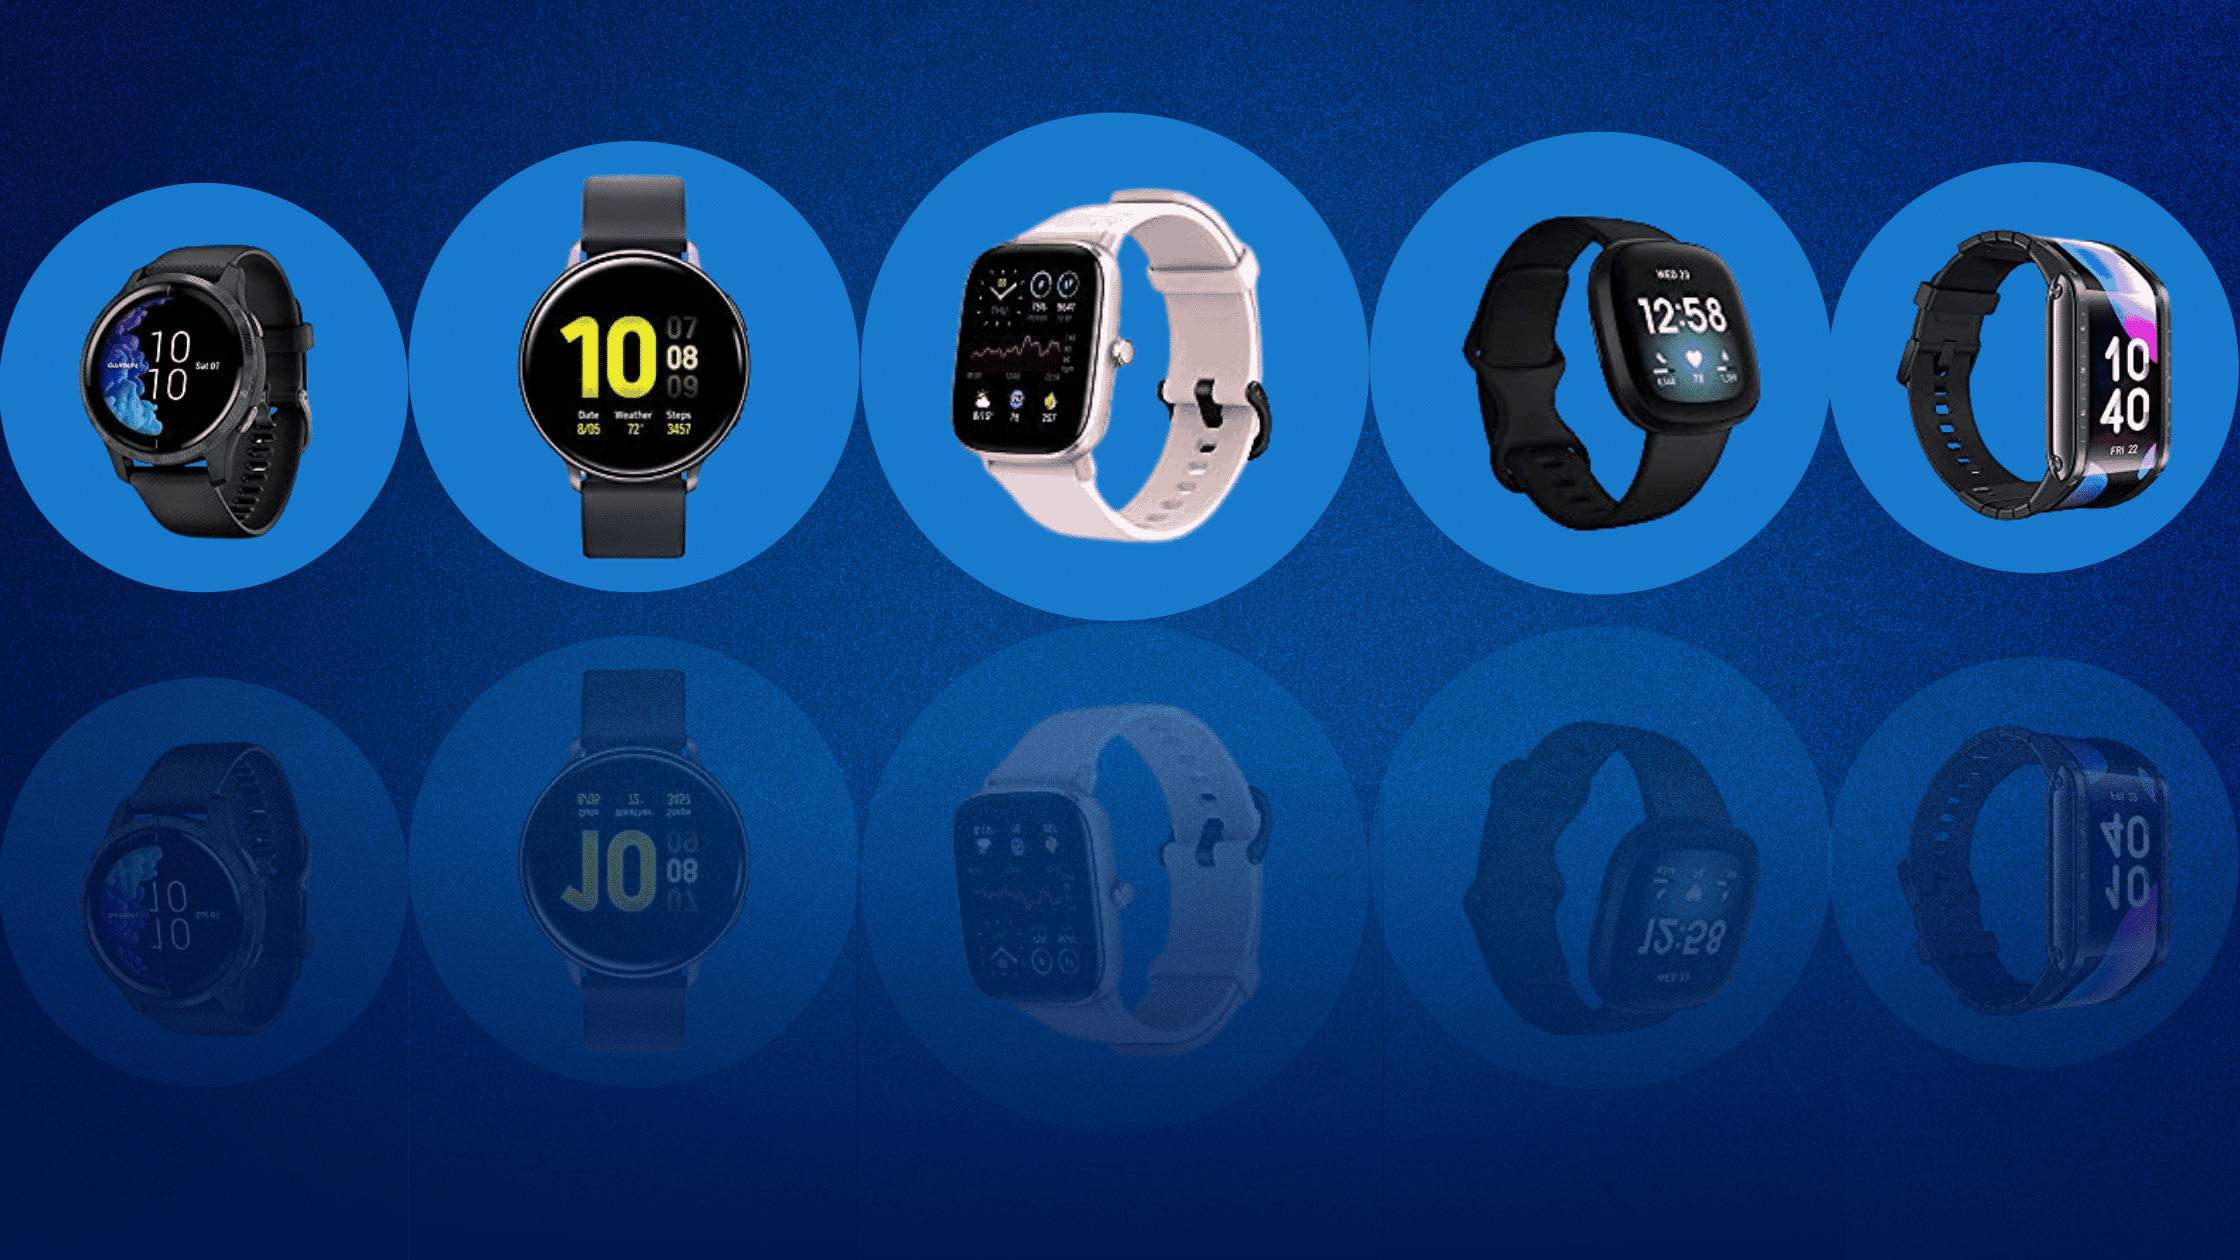 5 Smartwatches That You Don't Want To Miss